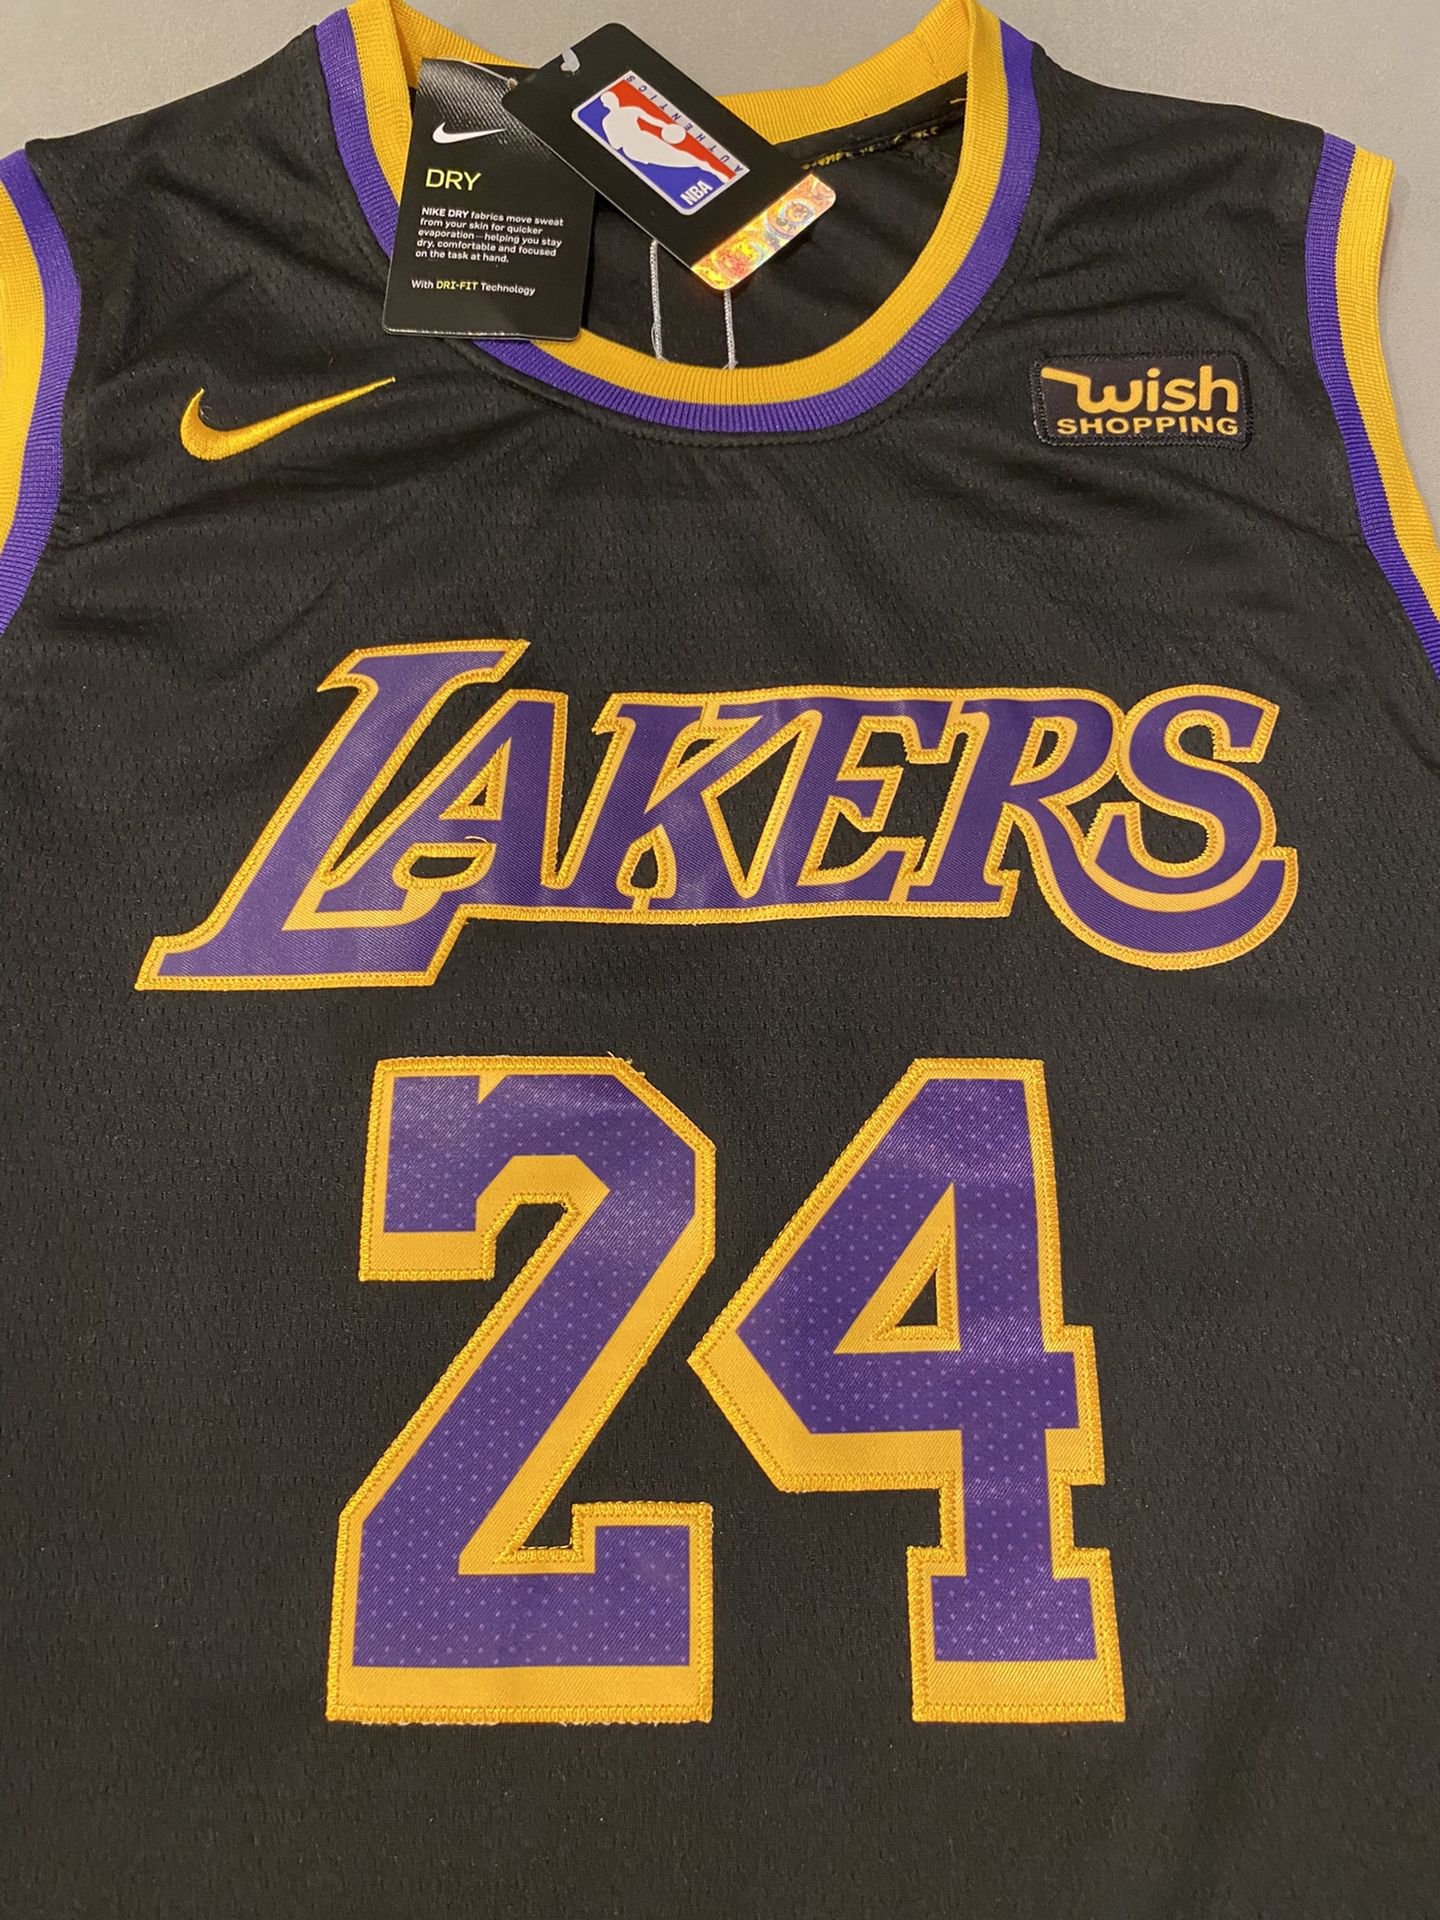 Kobe Bryant Gucci Lakers Nike Basketball Jersey XXL for Sale in Lakeland,  FL - OfferUp